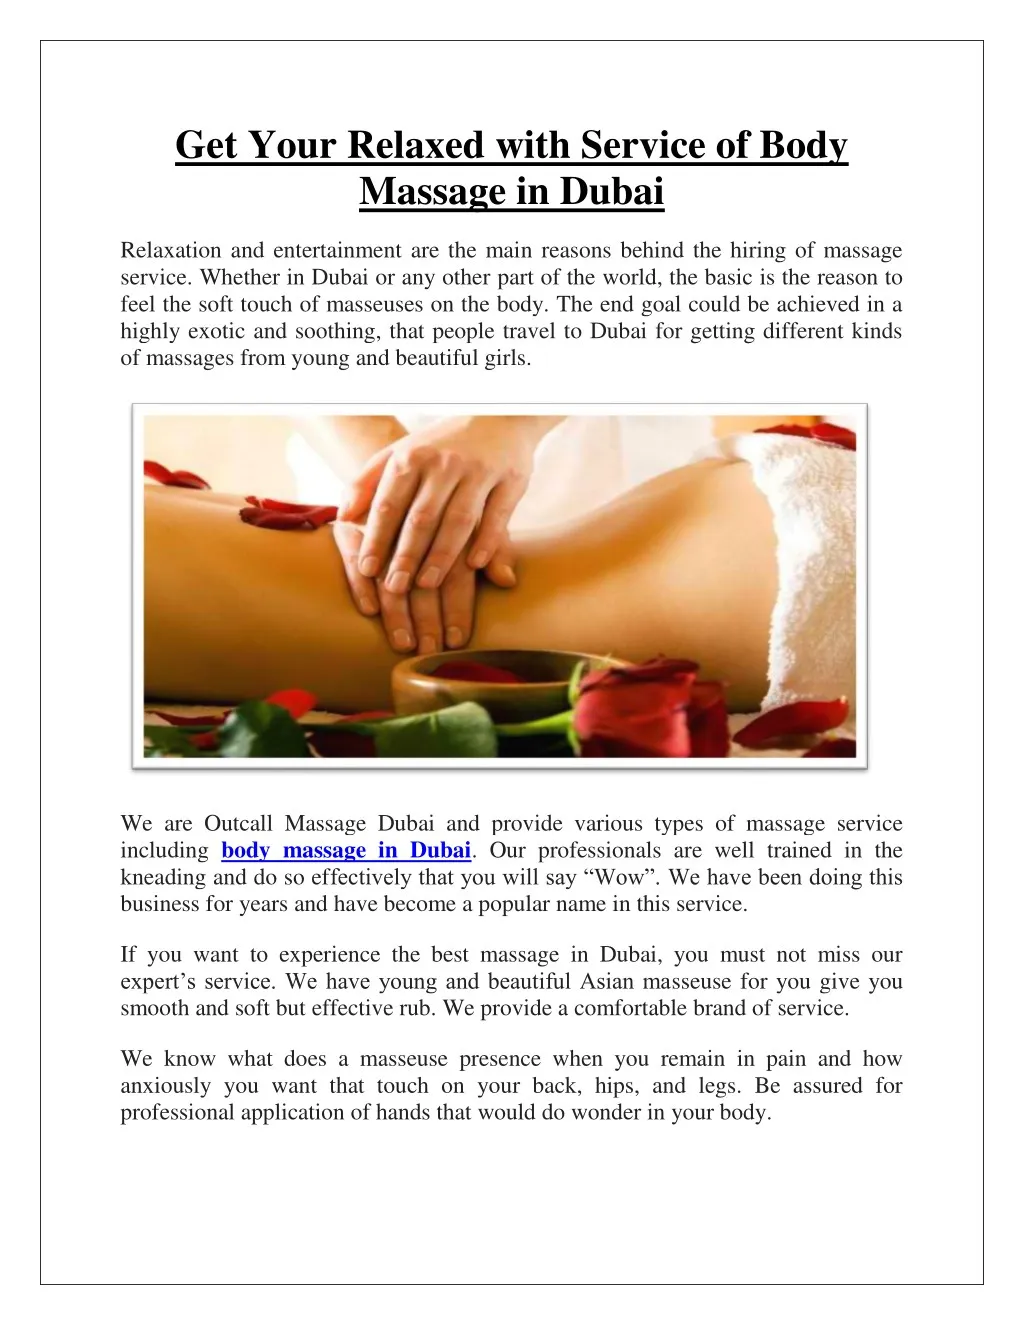 get your relaxed with service of body massage